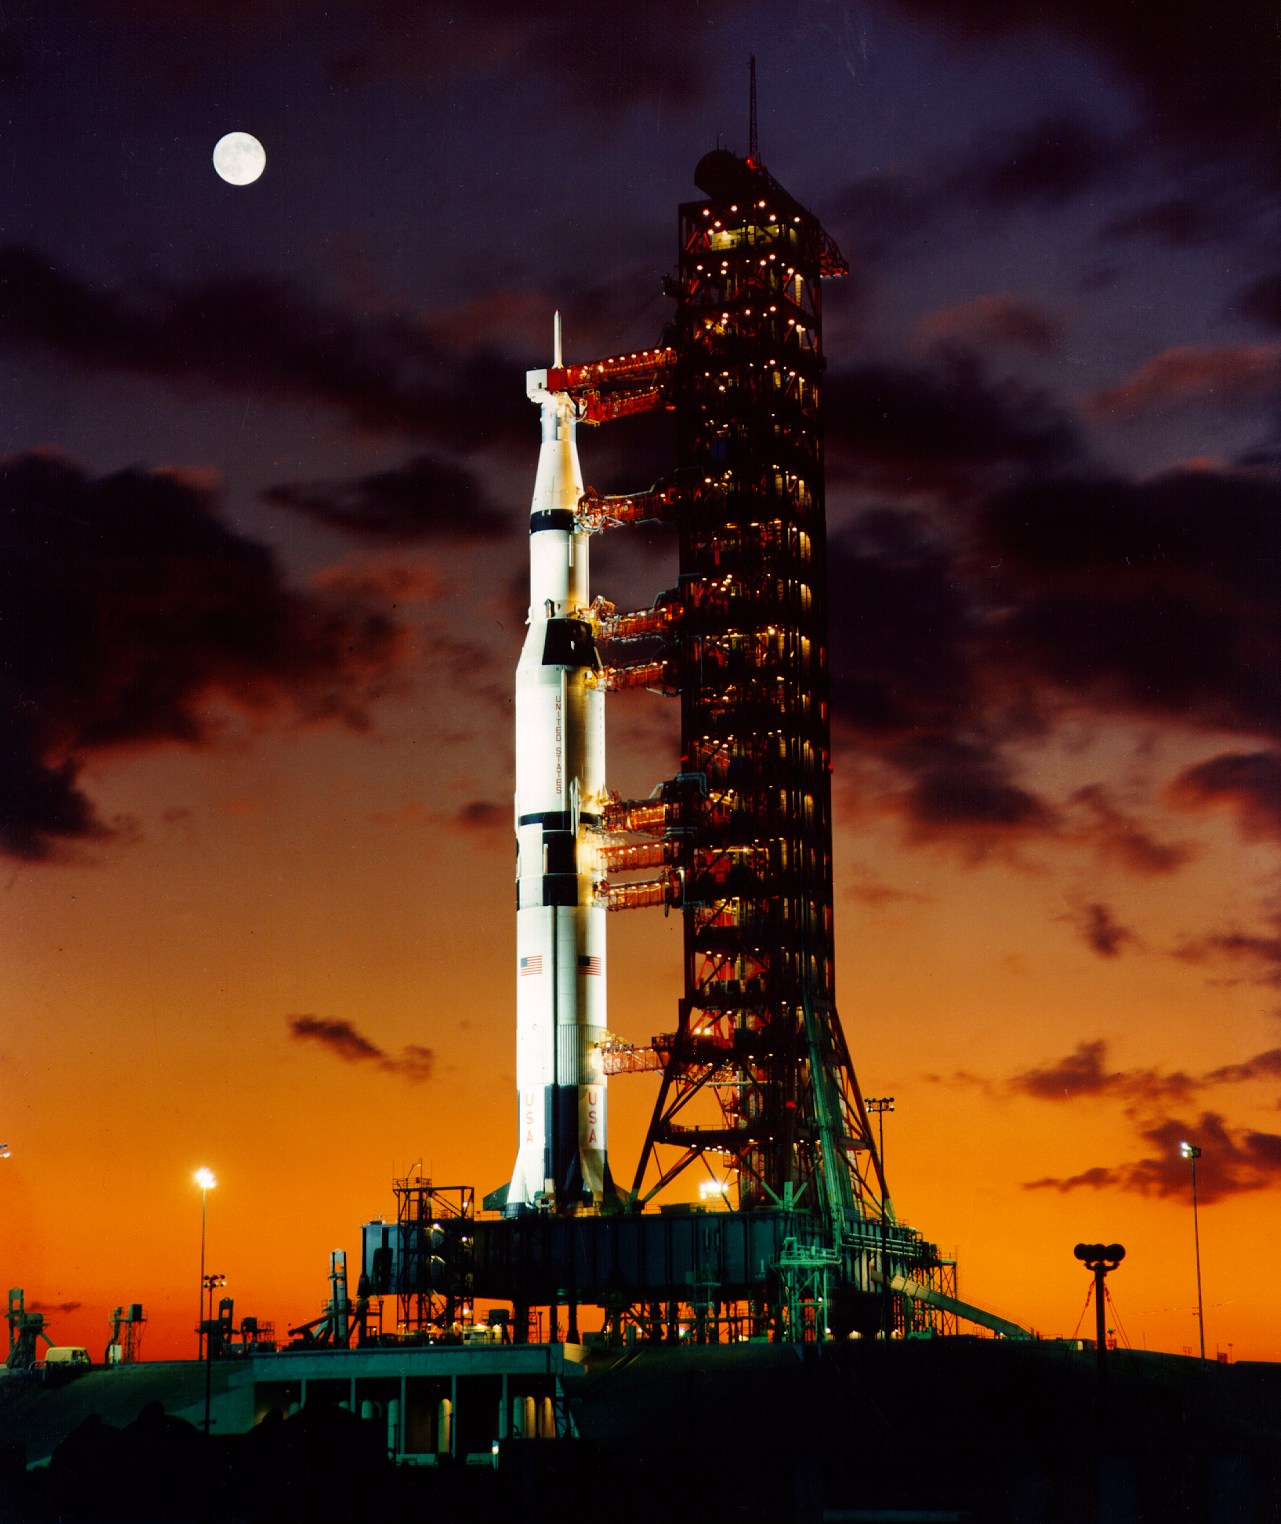 SATURN INT-21 LAUNCHES SKYLAB SPACE STATION 8x10 PHOTO 